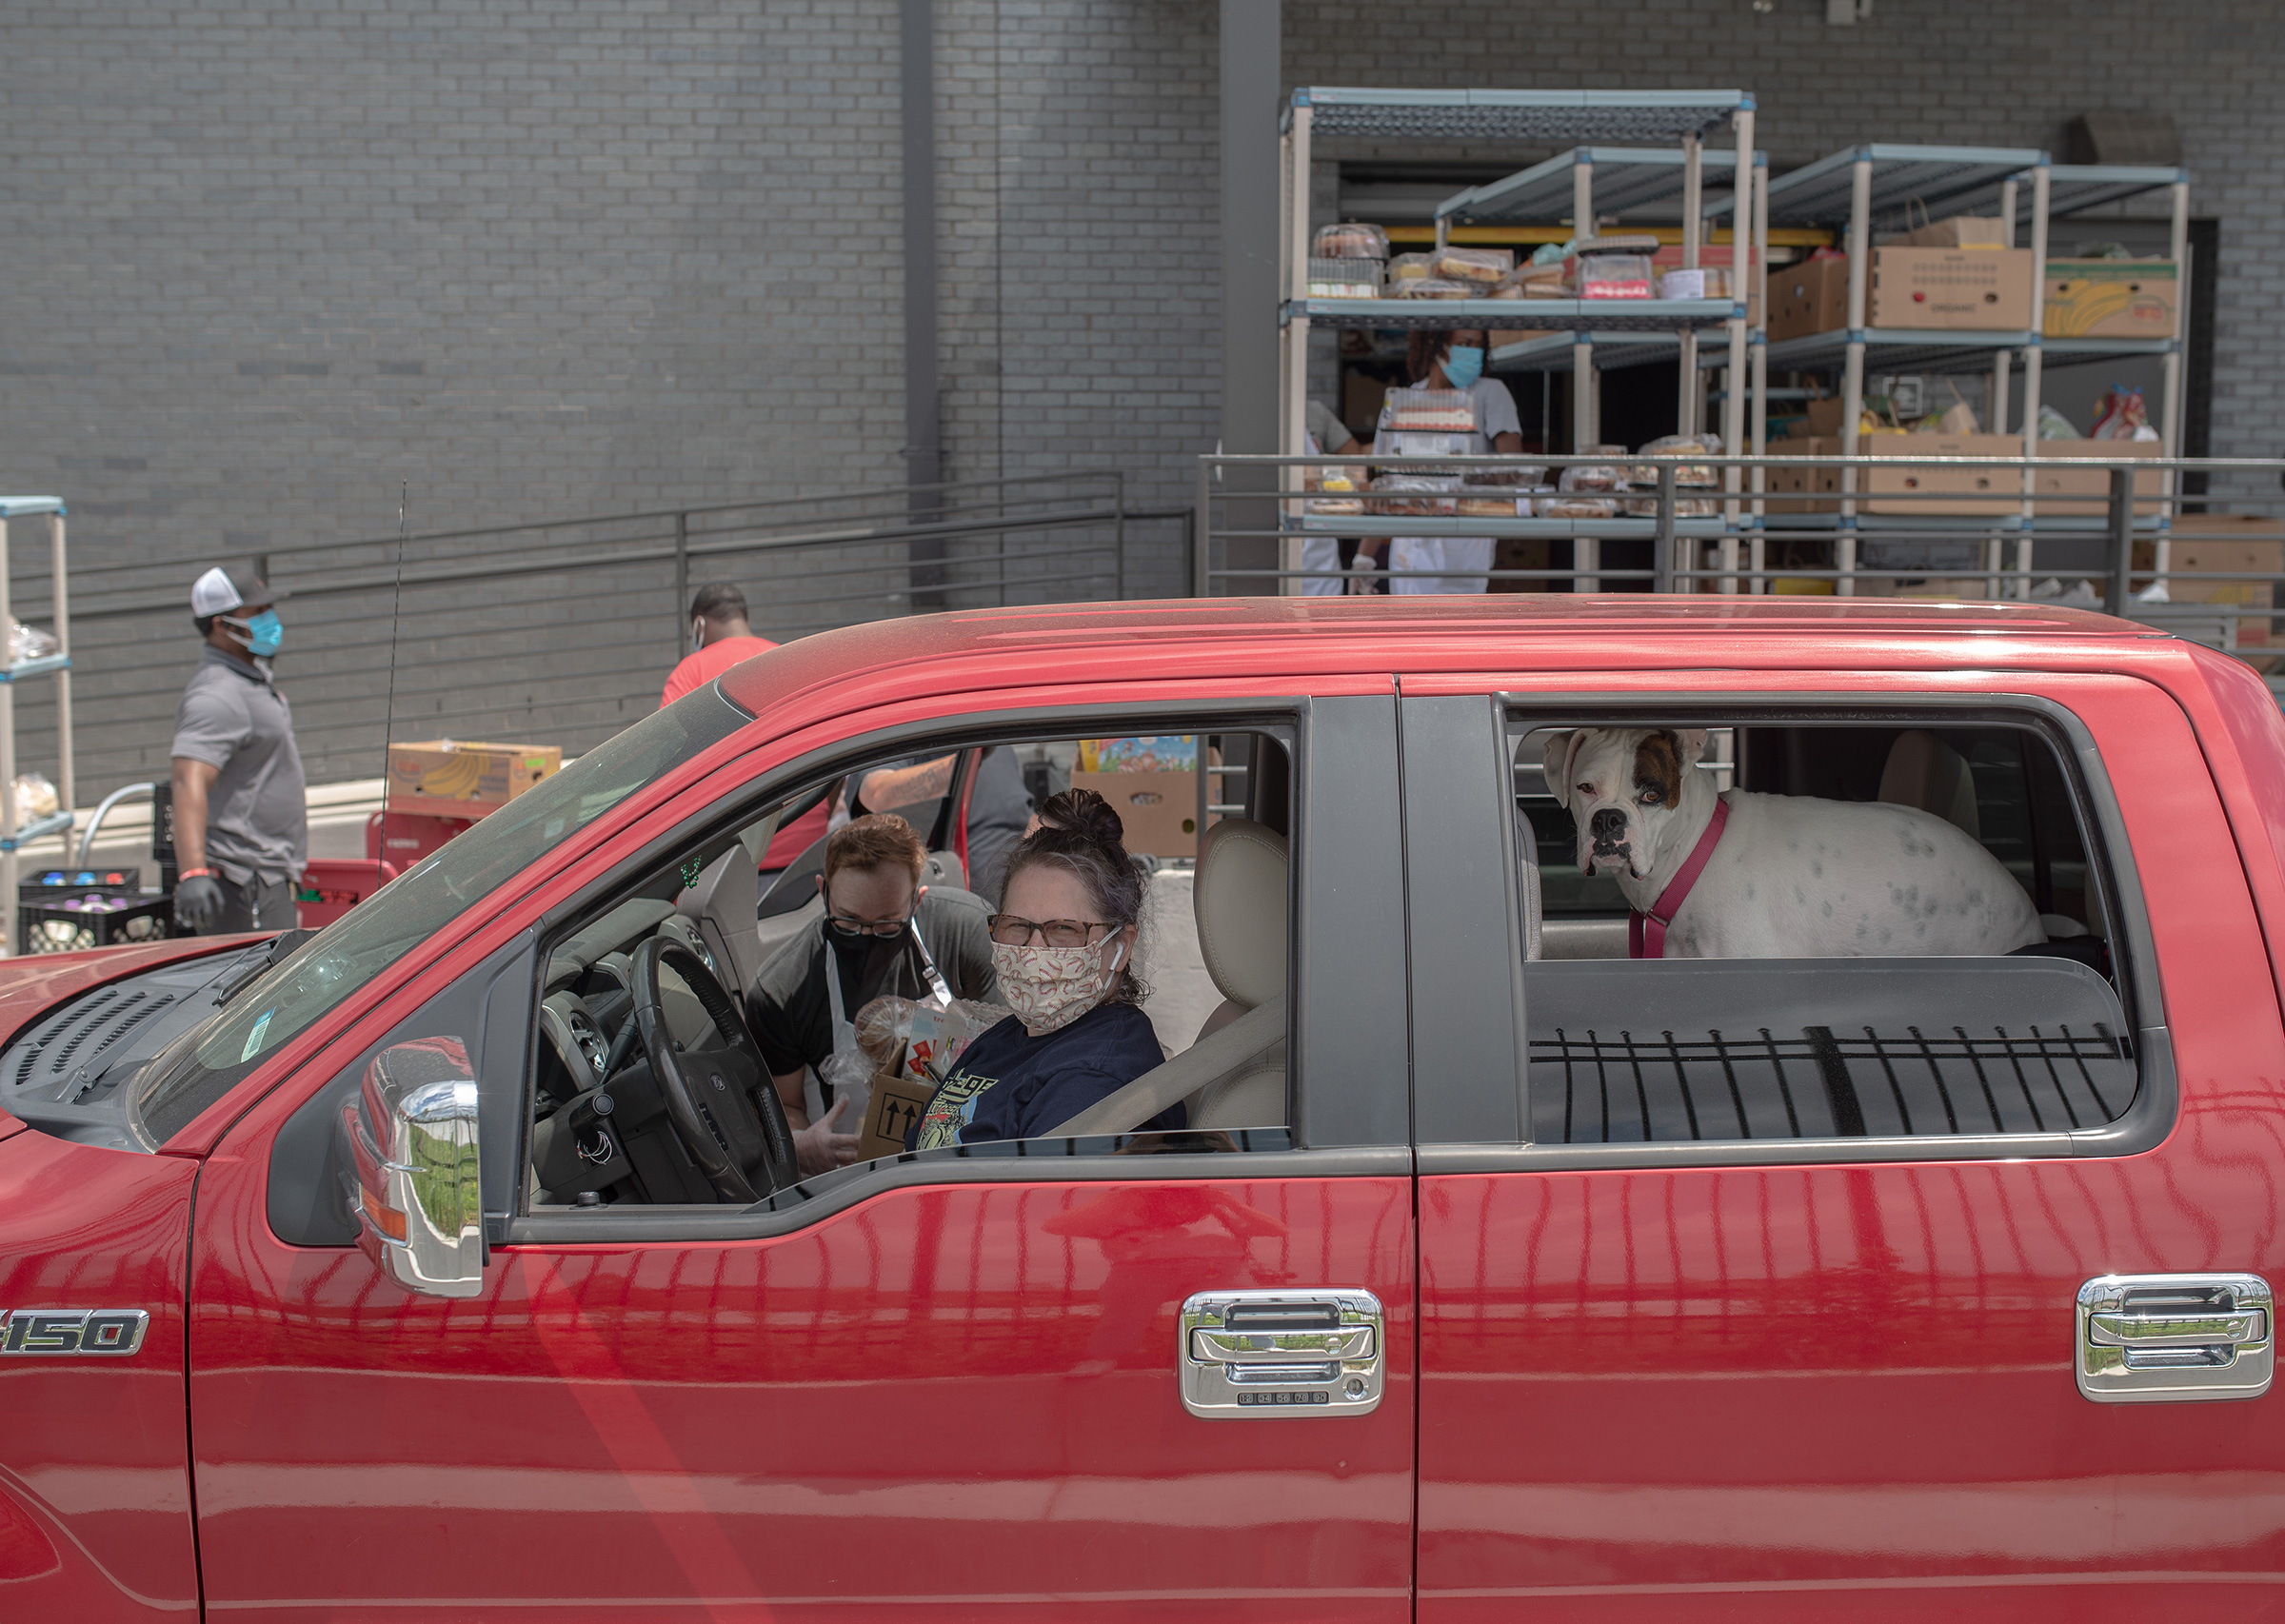 Stacy Aaensom, of Tulsa, Okla., on May 4. She picked up groceries at the Iron Gate drive-through food pantry for some relatives. “They haven’t asked me to do that but they don’t have a car,” she says, "so I’ve been doing that to help them out." (September Dawn Bottoms for TIME)